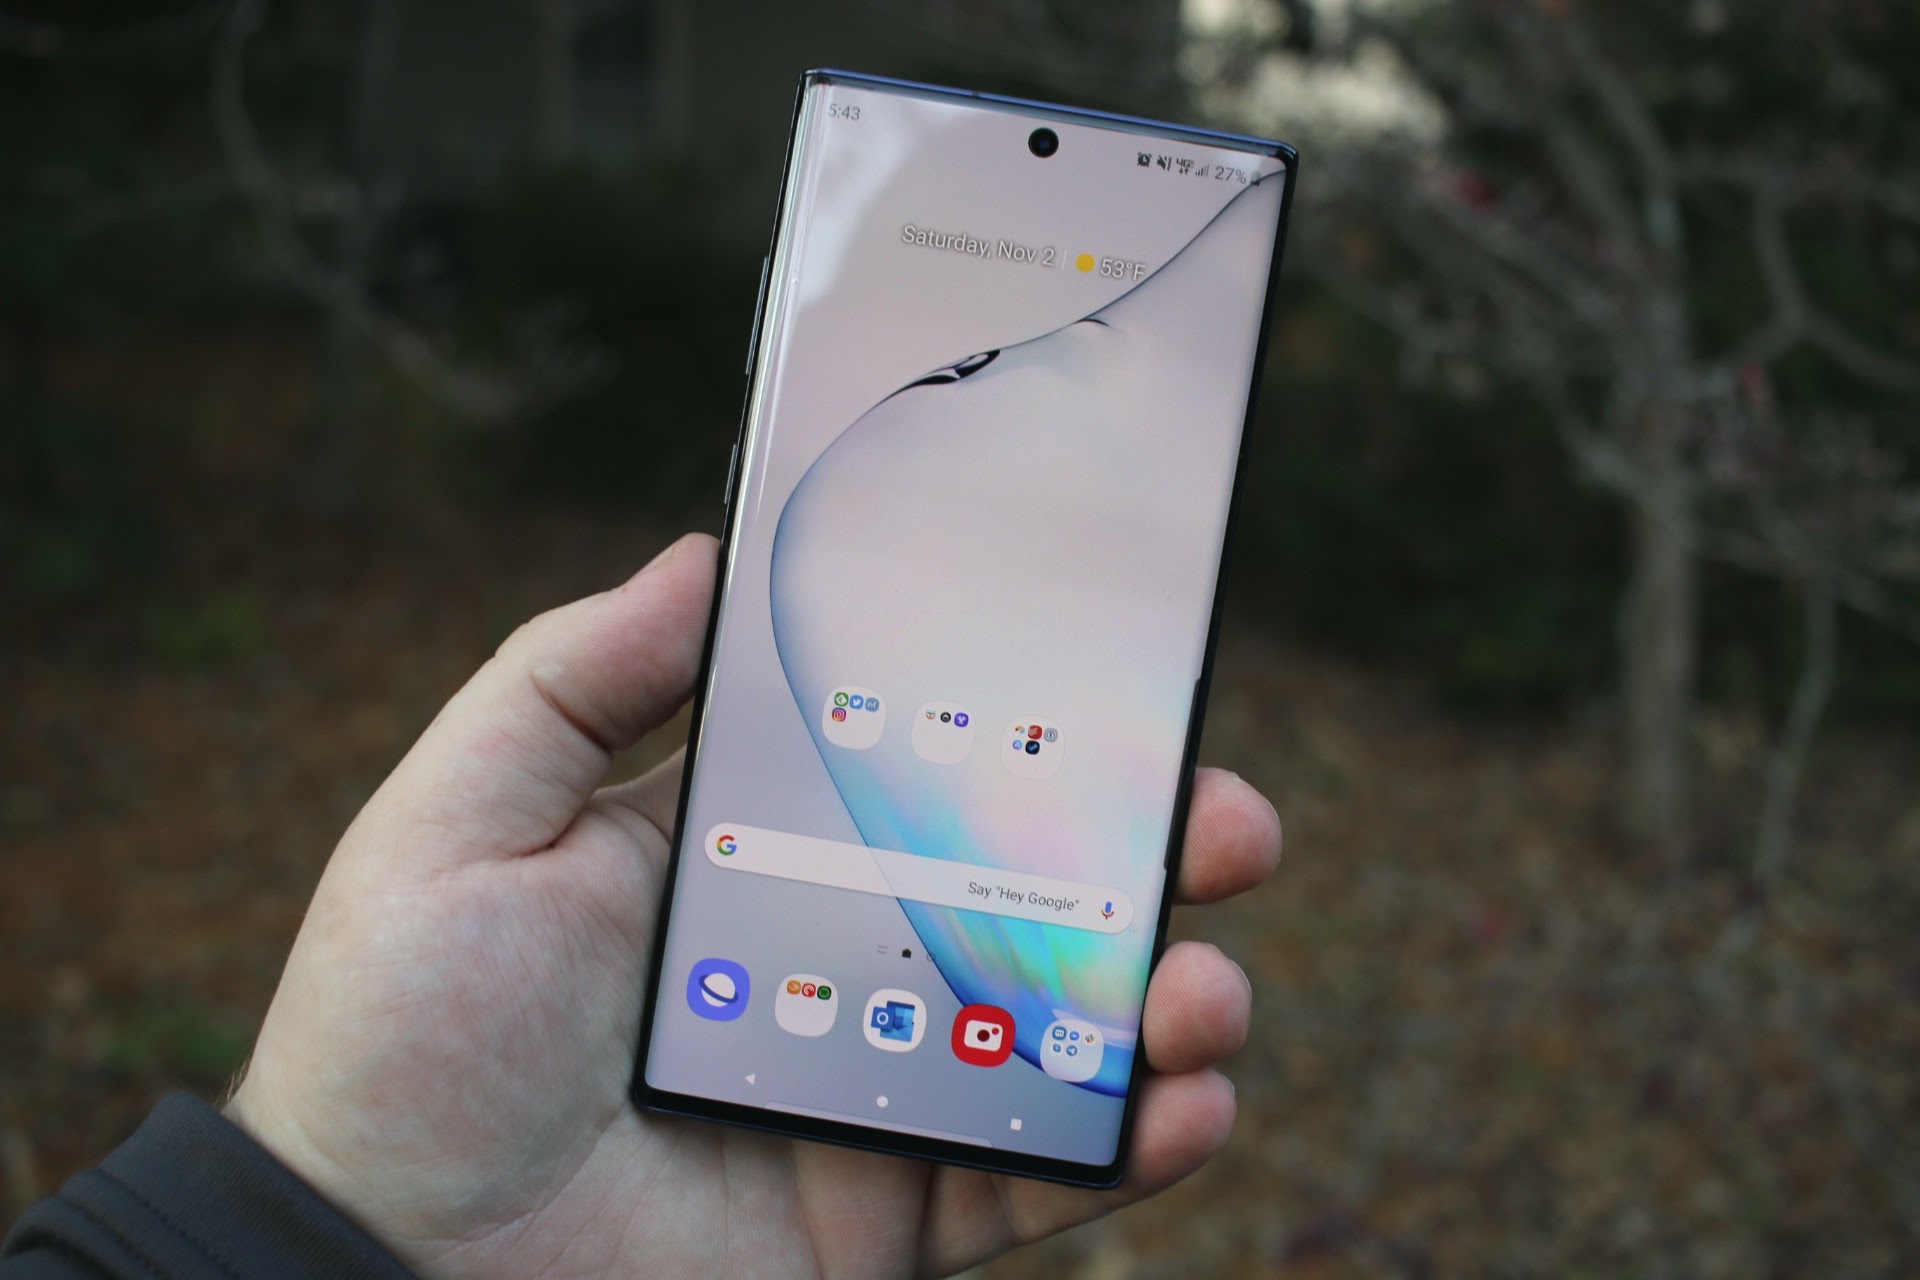 Samsung Galaxy Note 10 Plus review: should you spend for the